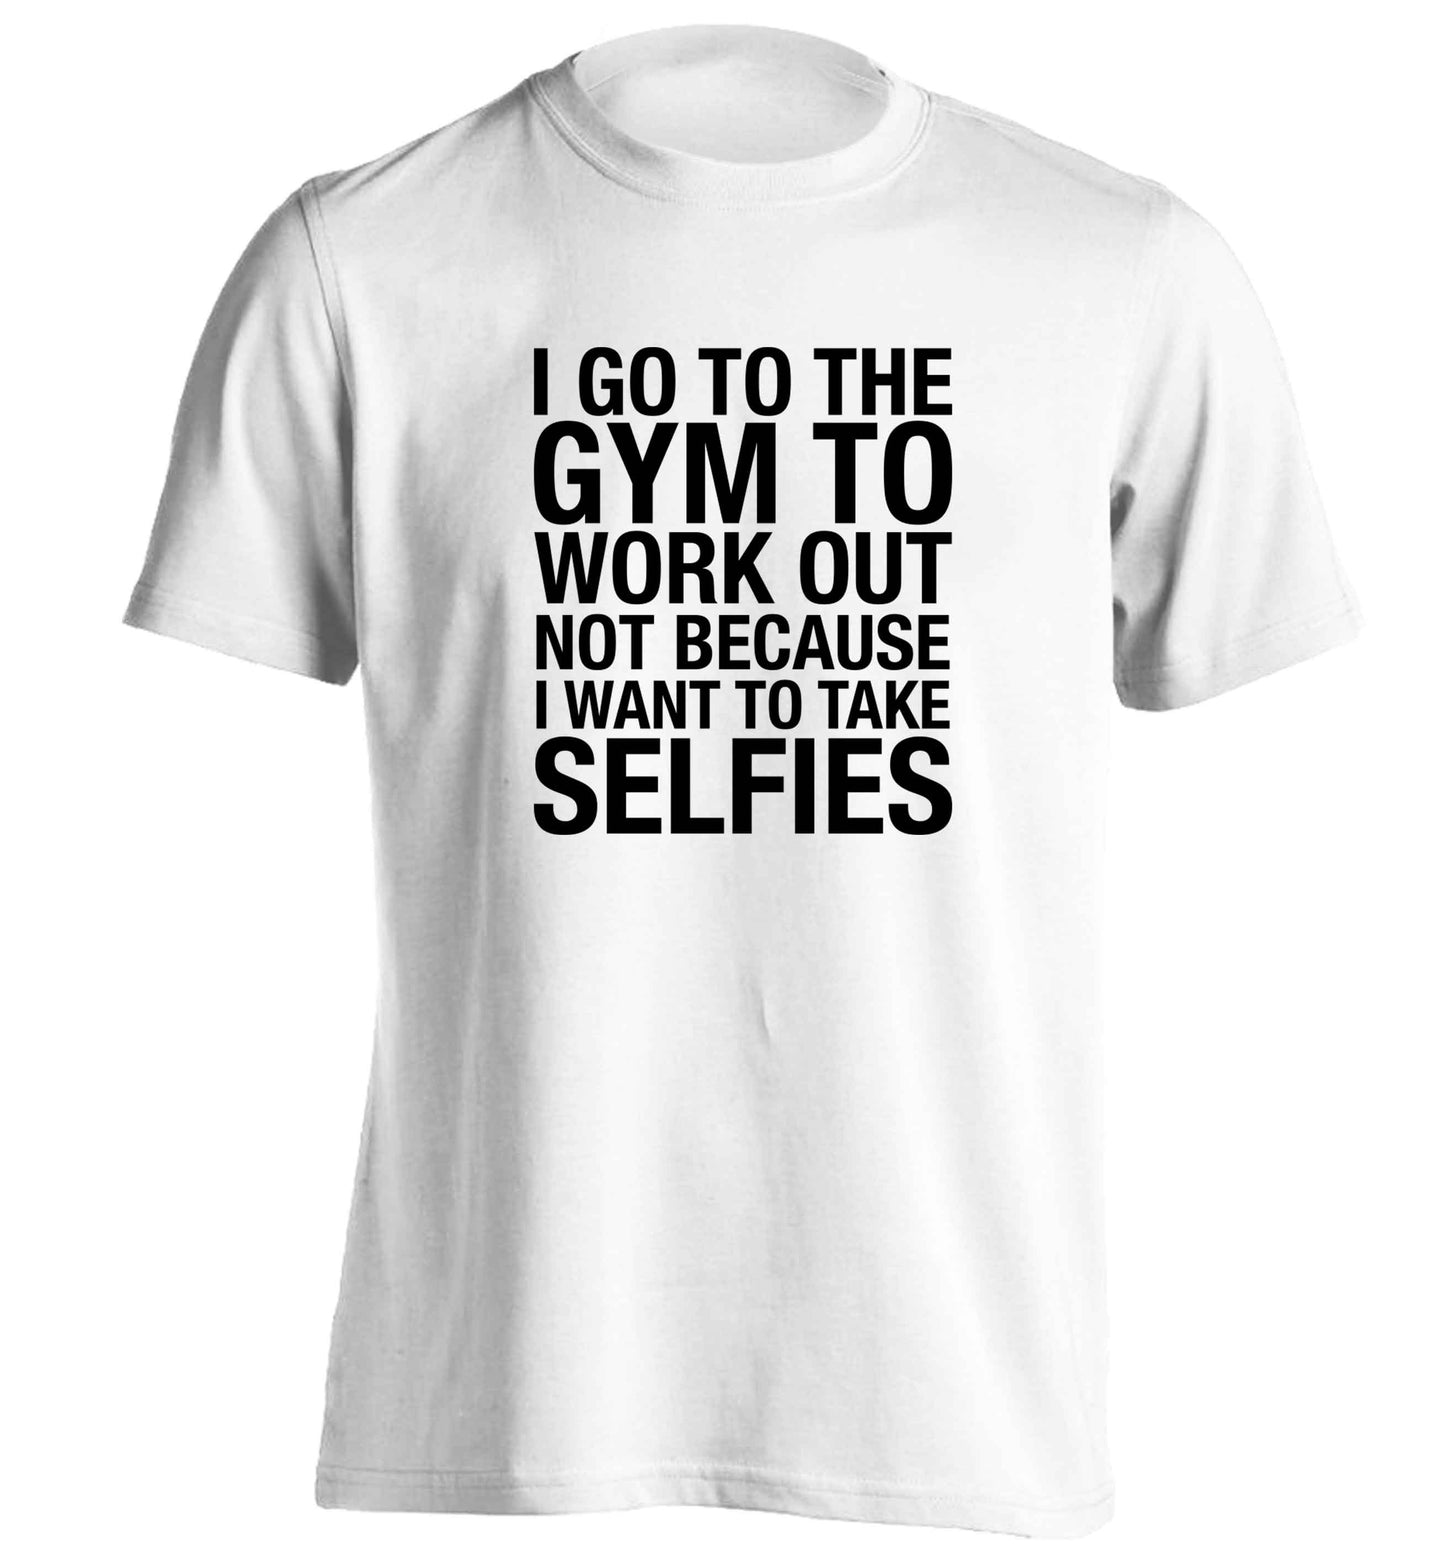 I go to the gym to workout not to take selfies adults unisex white Tshirt 2XL